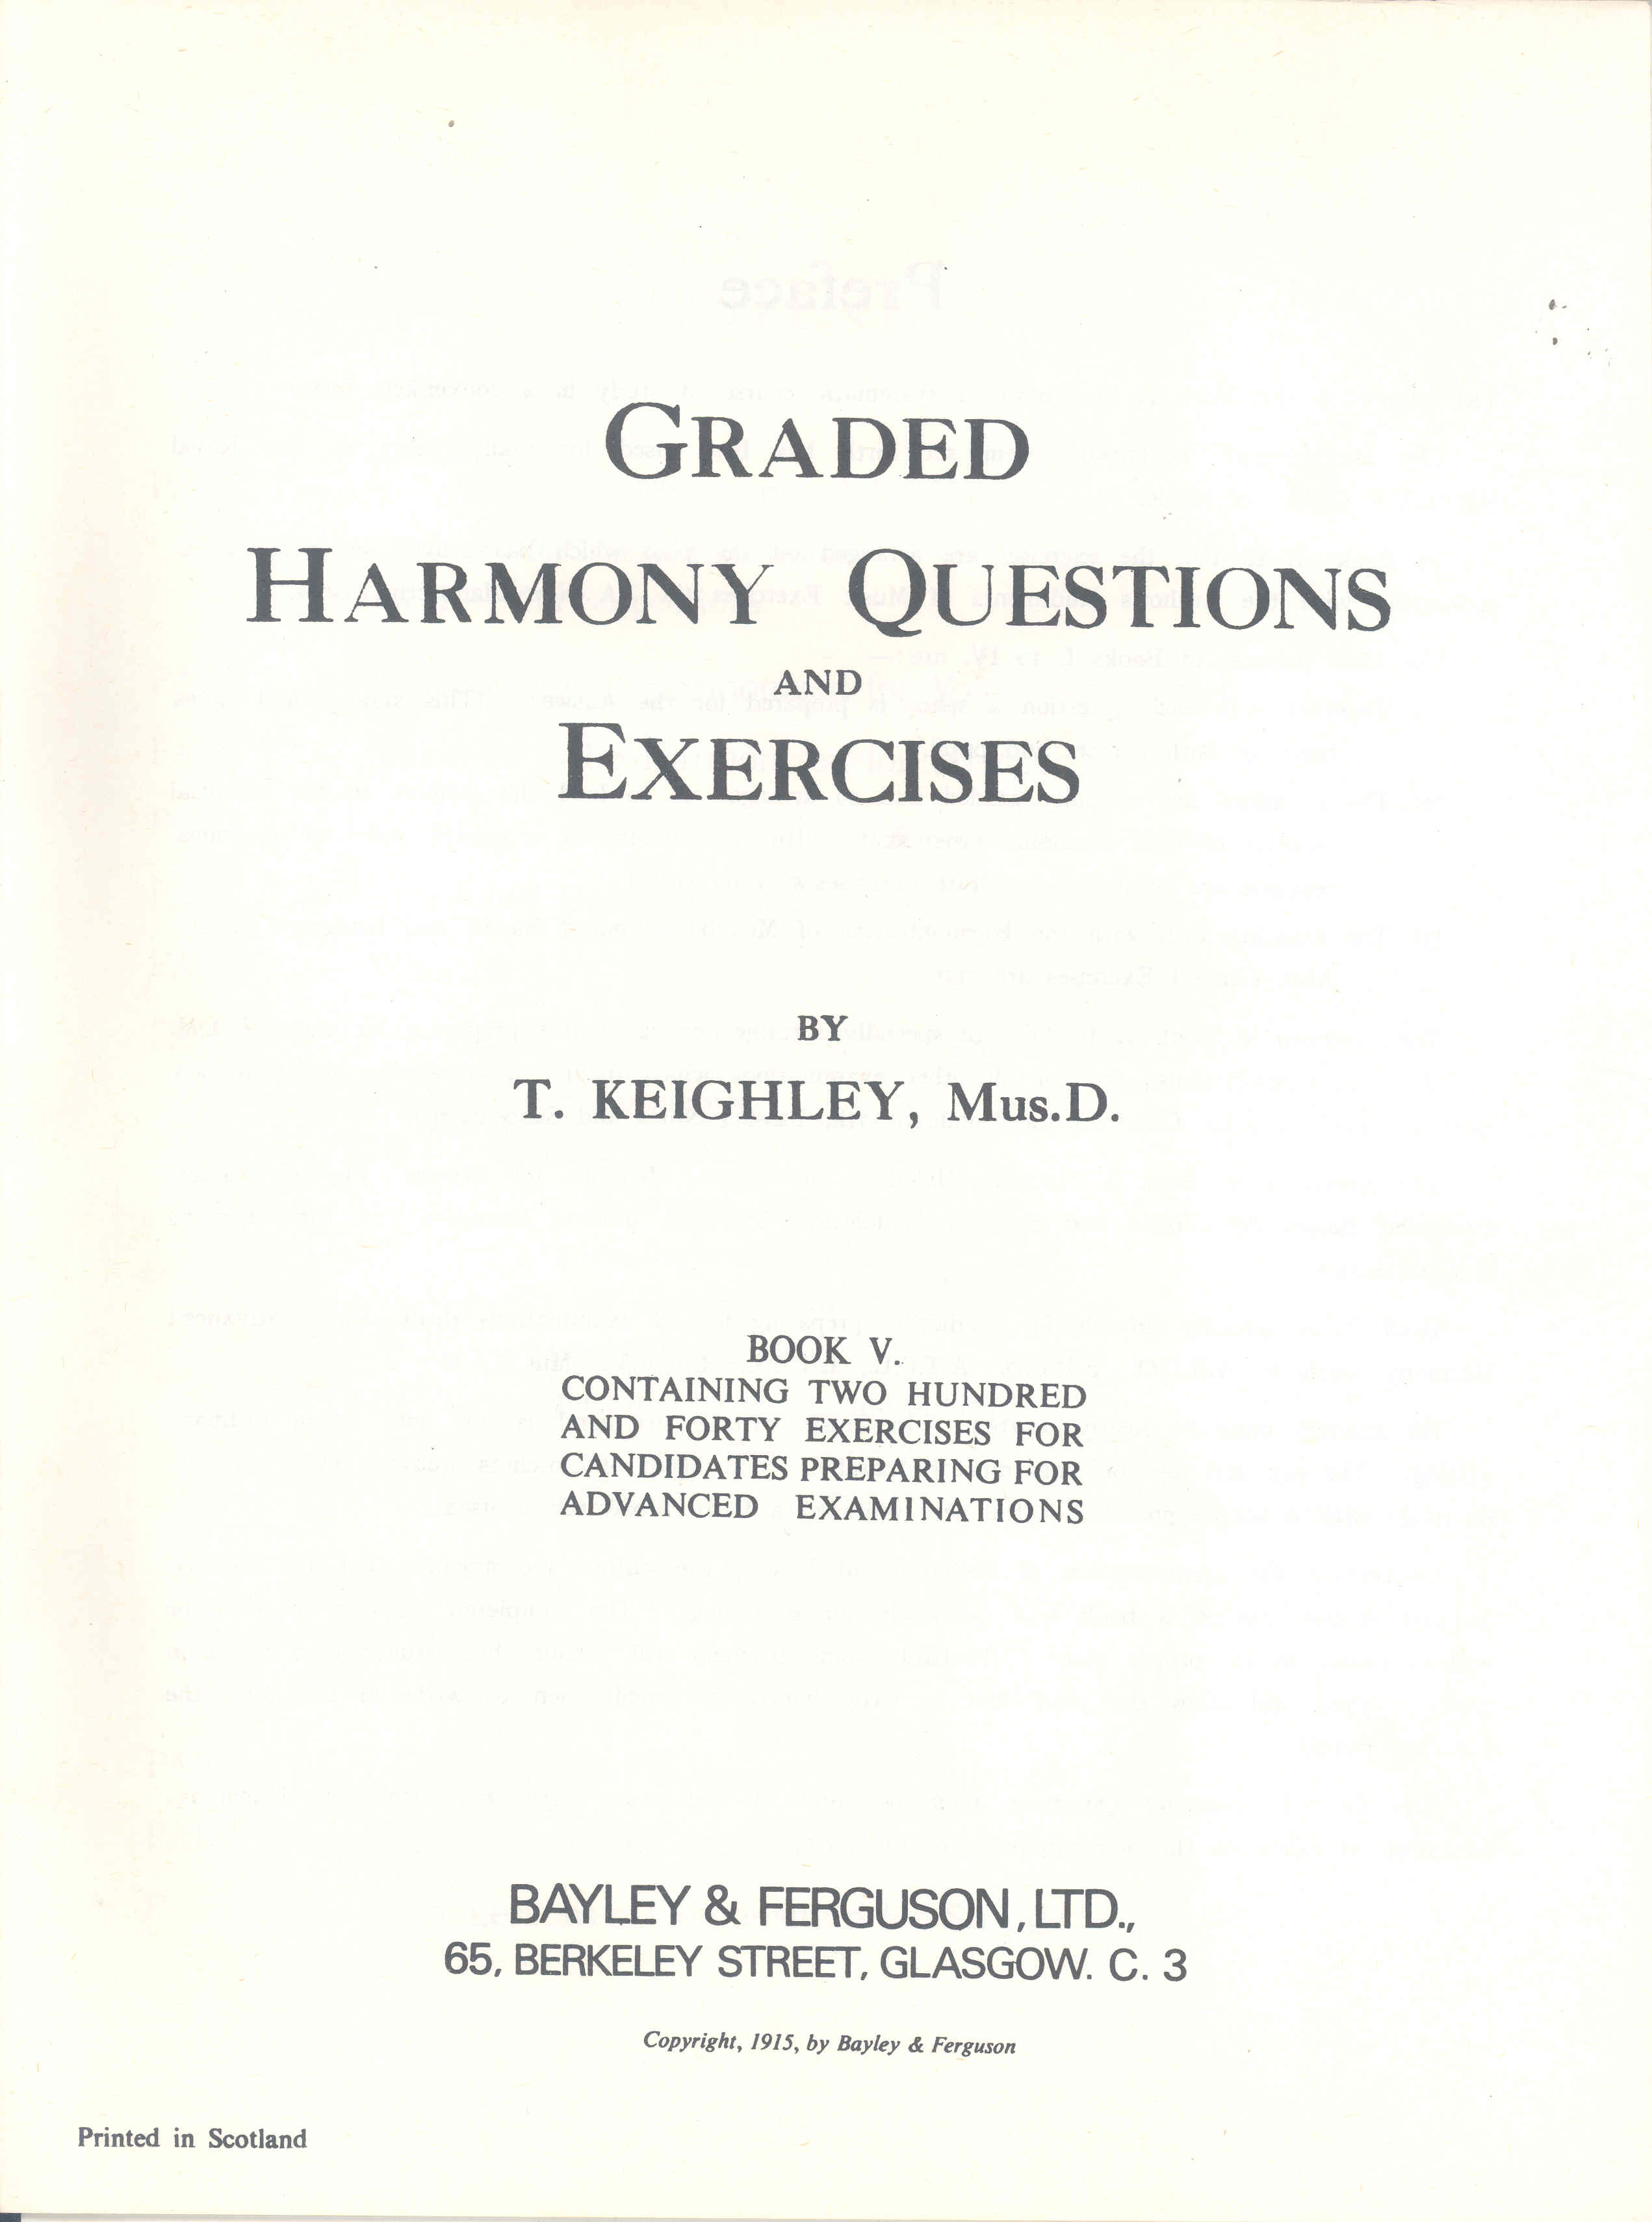 Keighley Graded Harmony Questions & Exercises Bk 5 Sheet Music Songbook